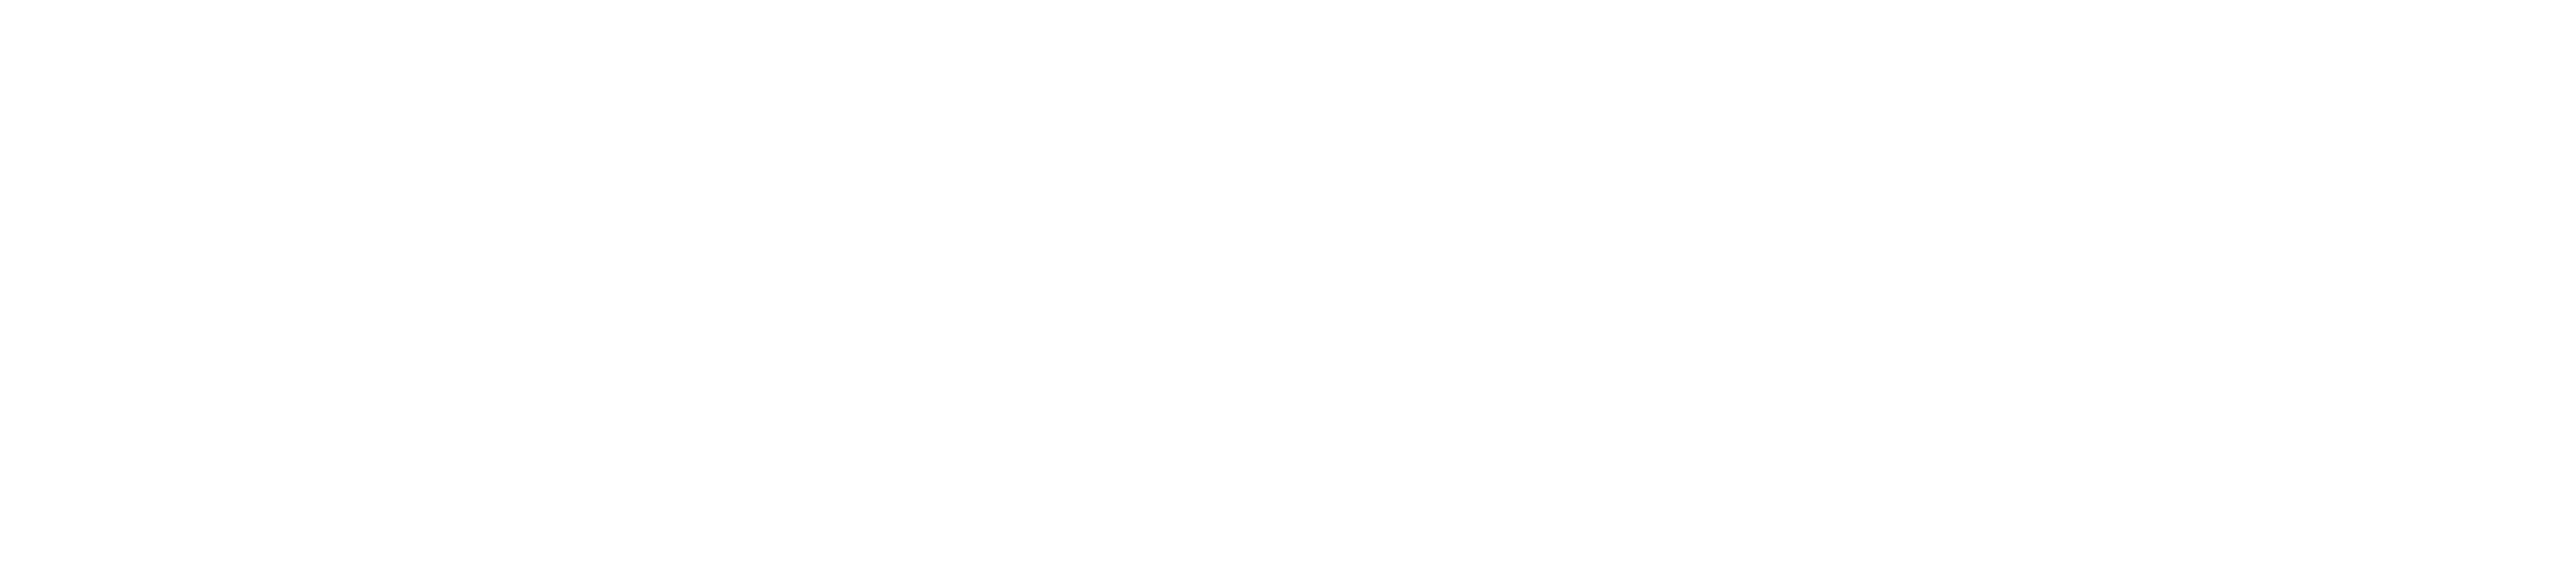 2560px-Therion-logo.svg